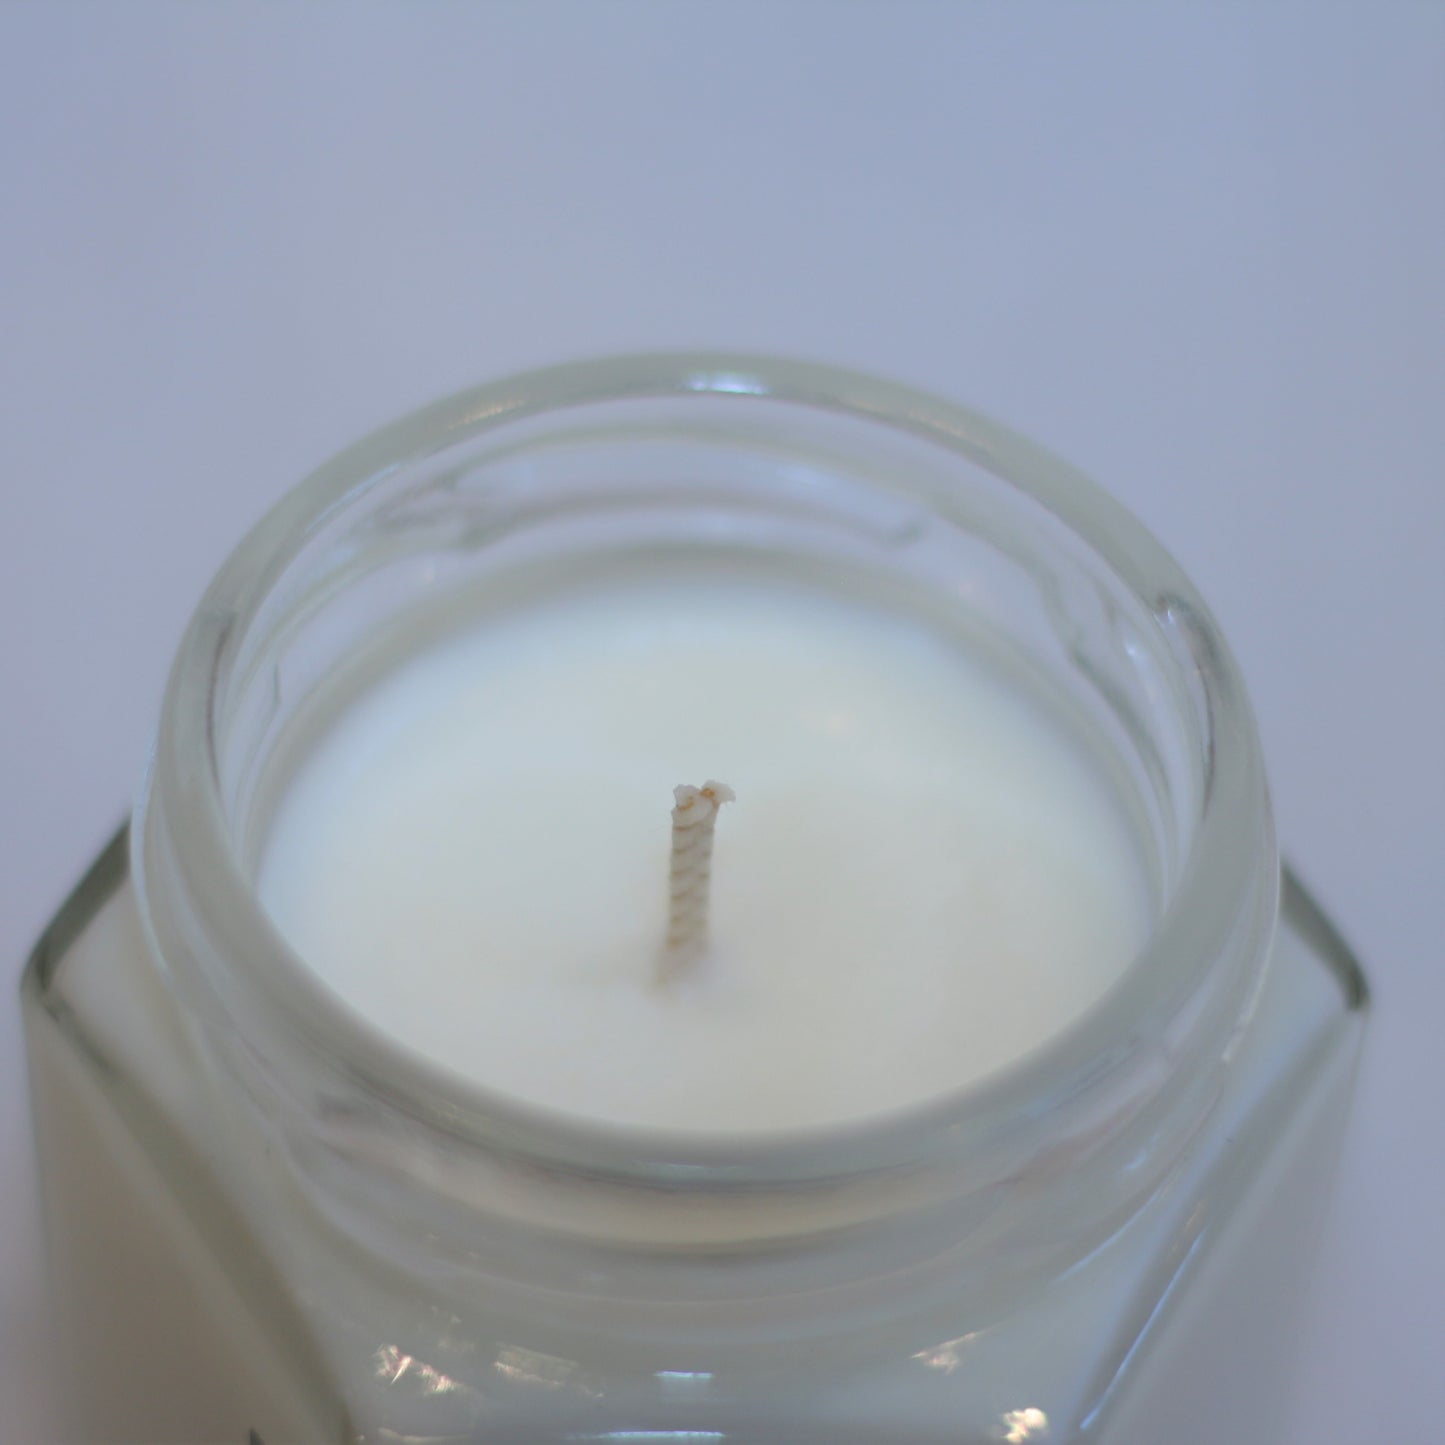 Fraser Fir | Handpoured Soy Wax Candle